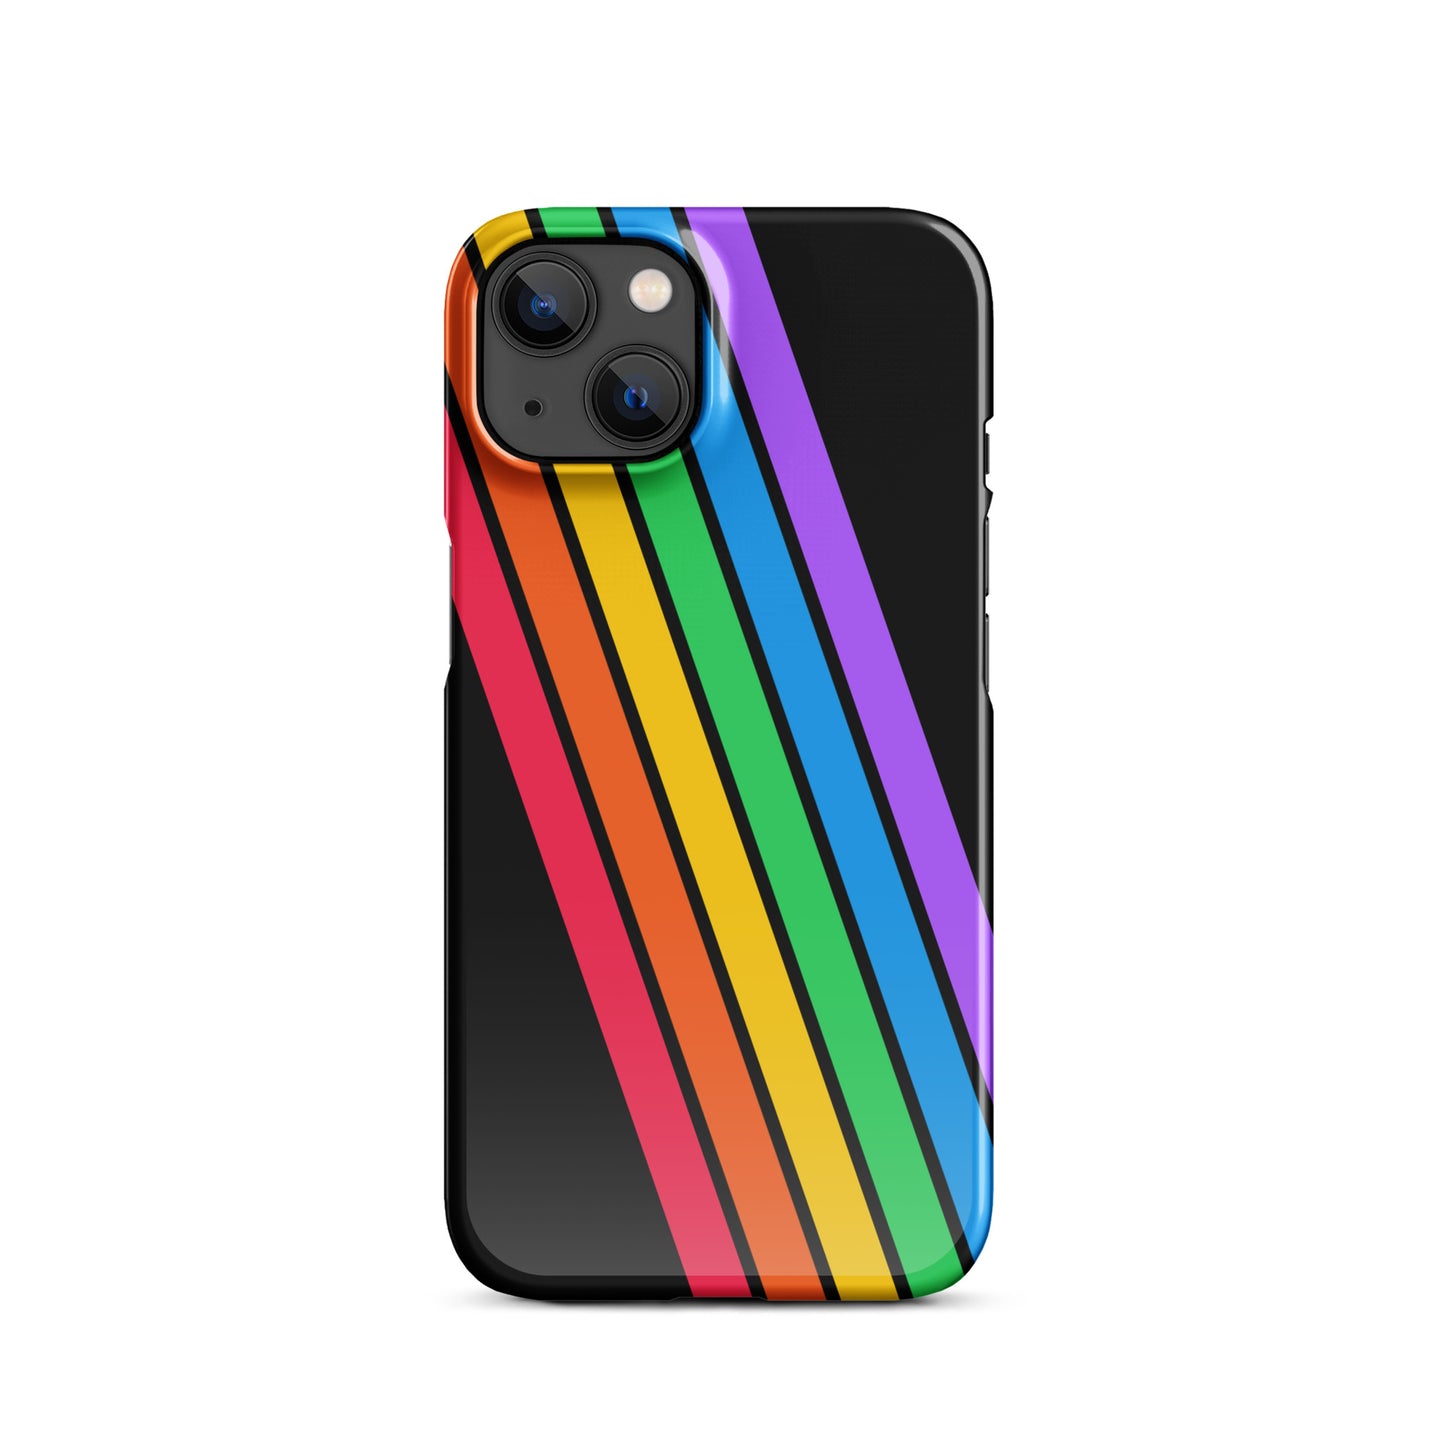 Snap case for iPhone: Tales of Colors